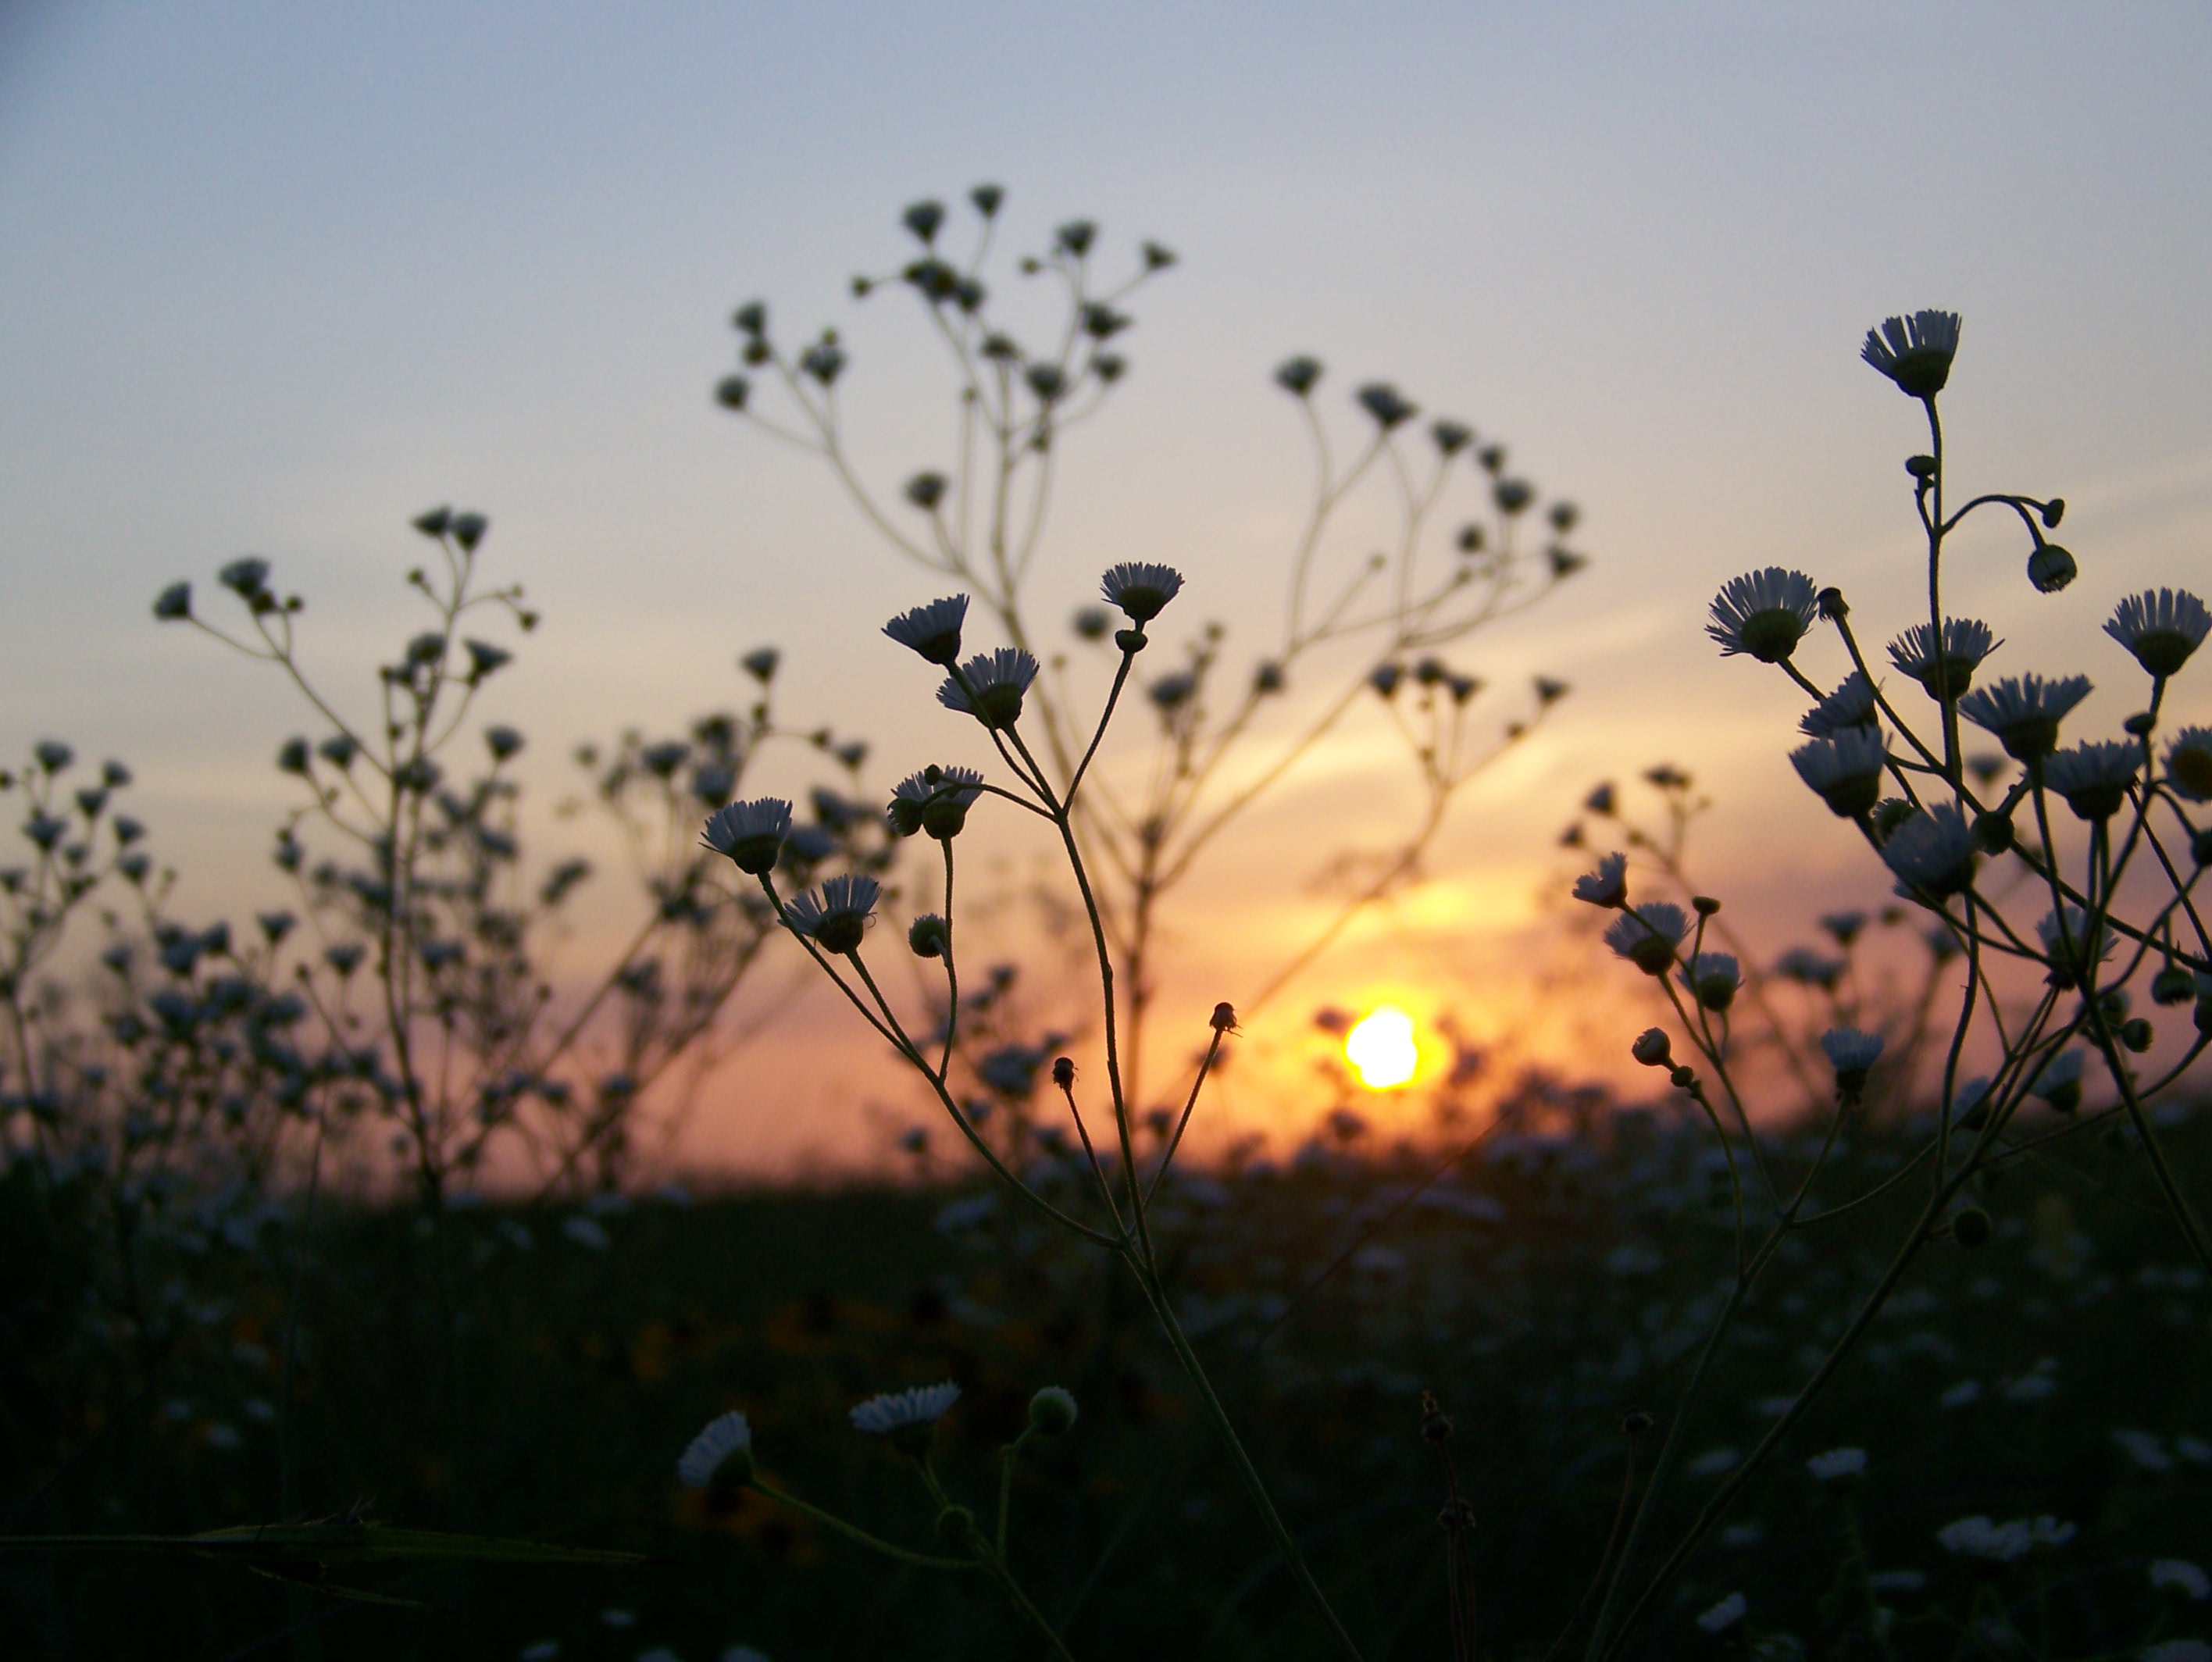 Wildflowers in silhouette as the sun sets.